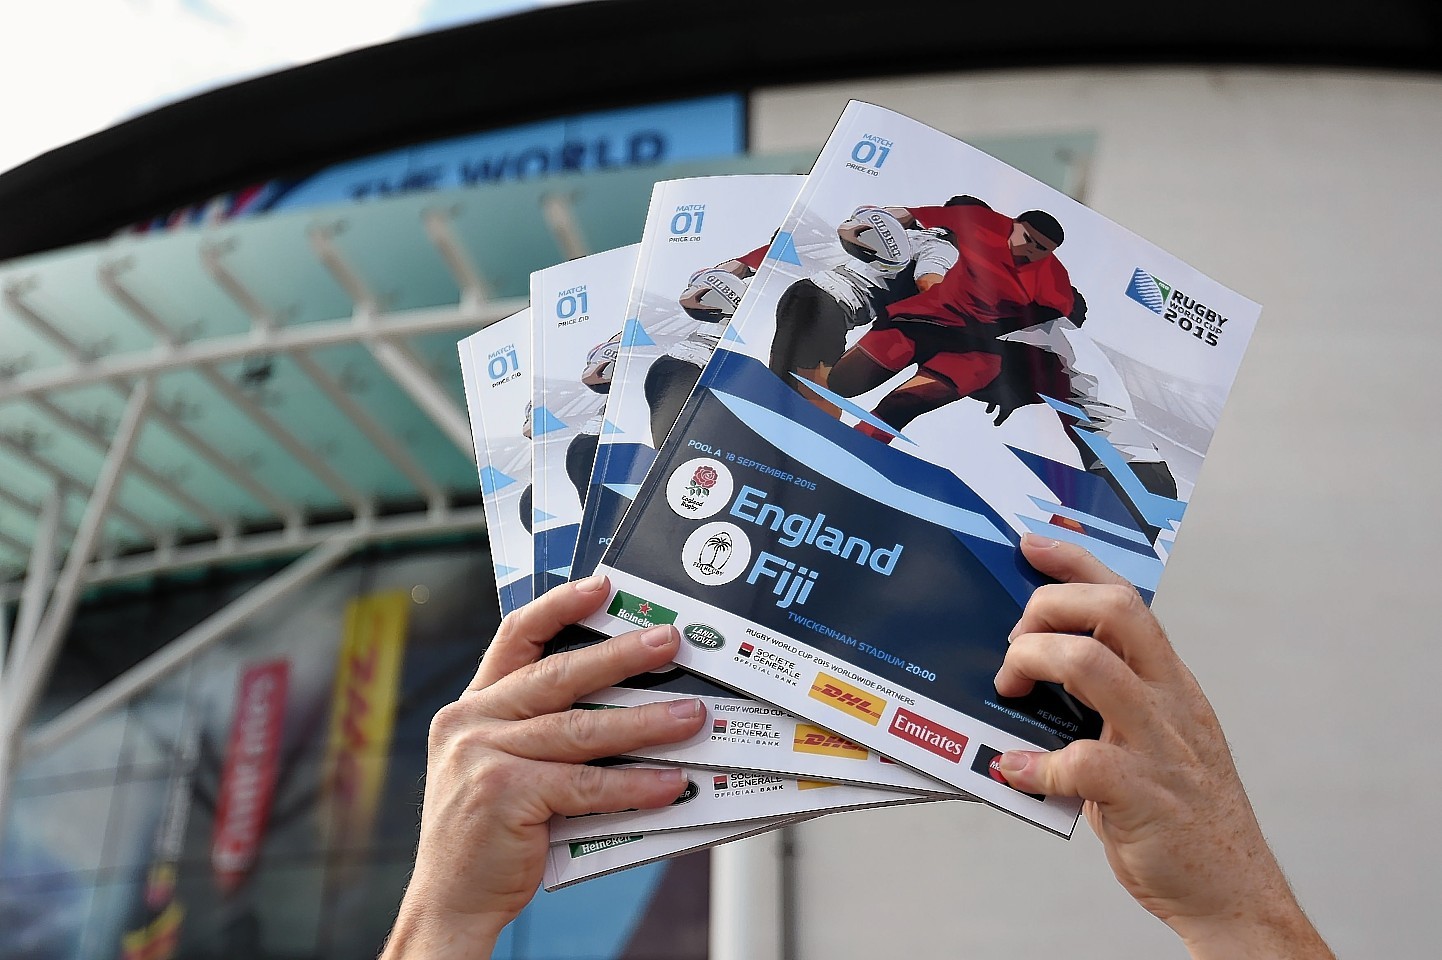 A programme seller holds up programmes ahead of tonight's opening match at Twickenham